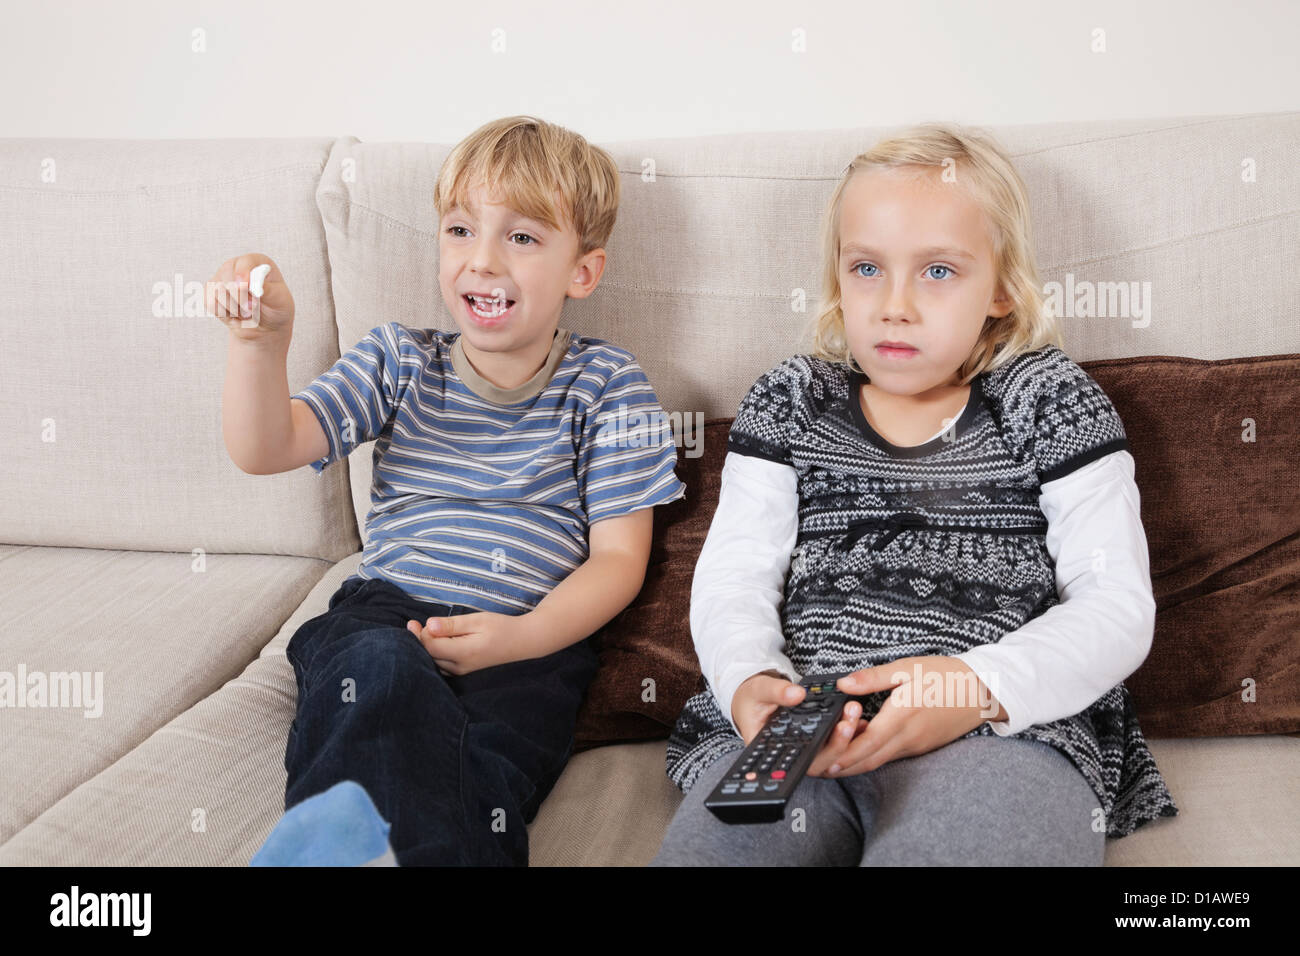 brother sister watching television Stock Photo